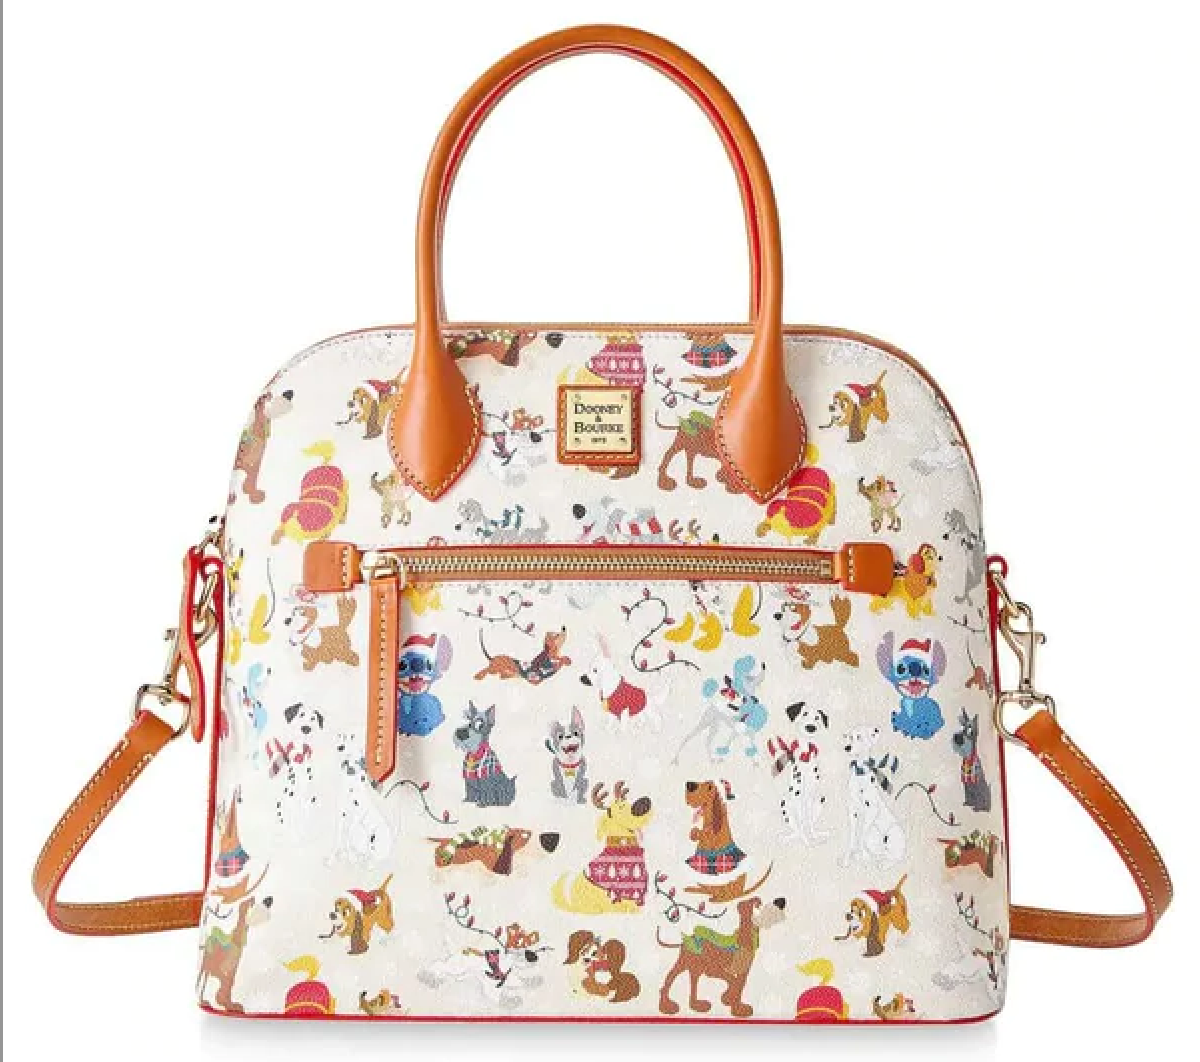 Disney Dogs Santa Tails Christmas Holiday Satchel Bag by Dooney and Bourke New